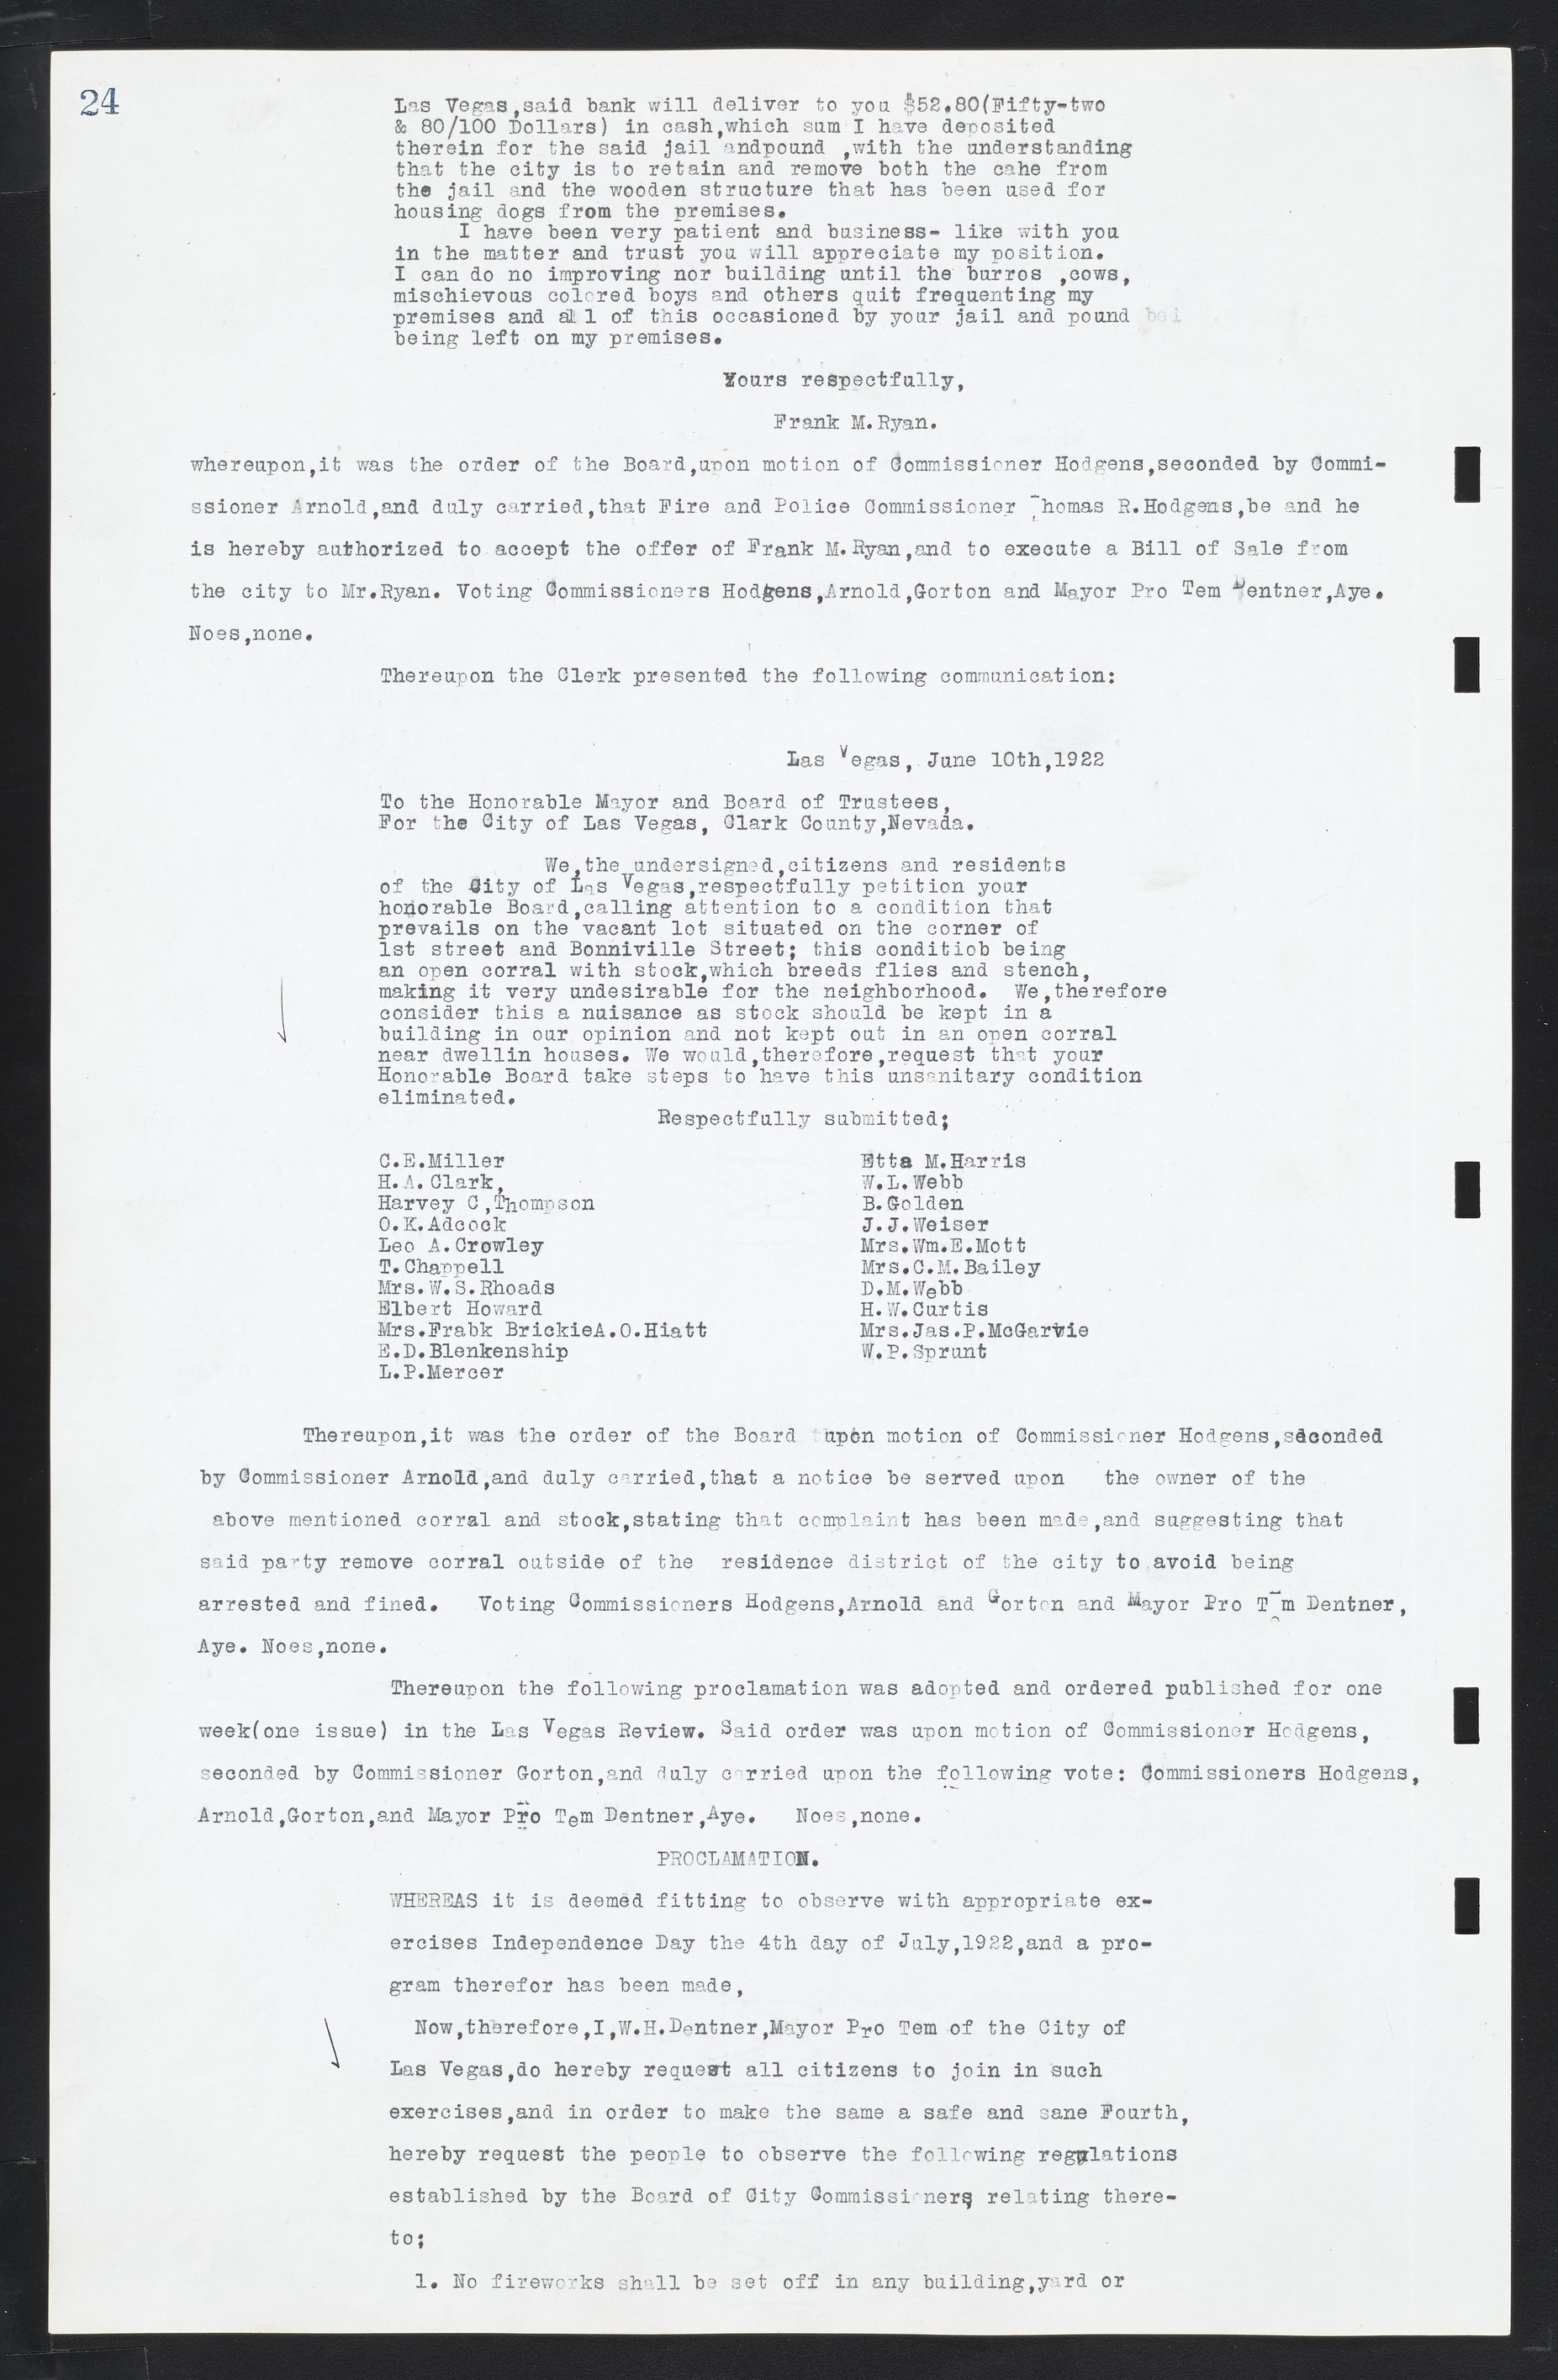 Las Vegas City Commission Minutes, March 1, 1922 to May 10, 1929, lvc000002-31